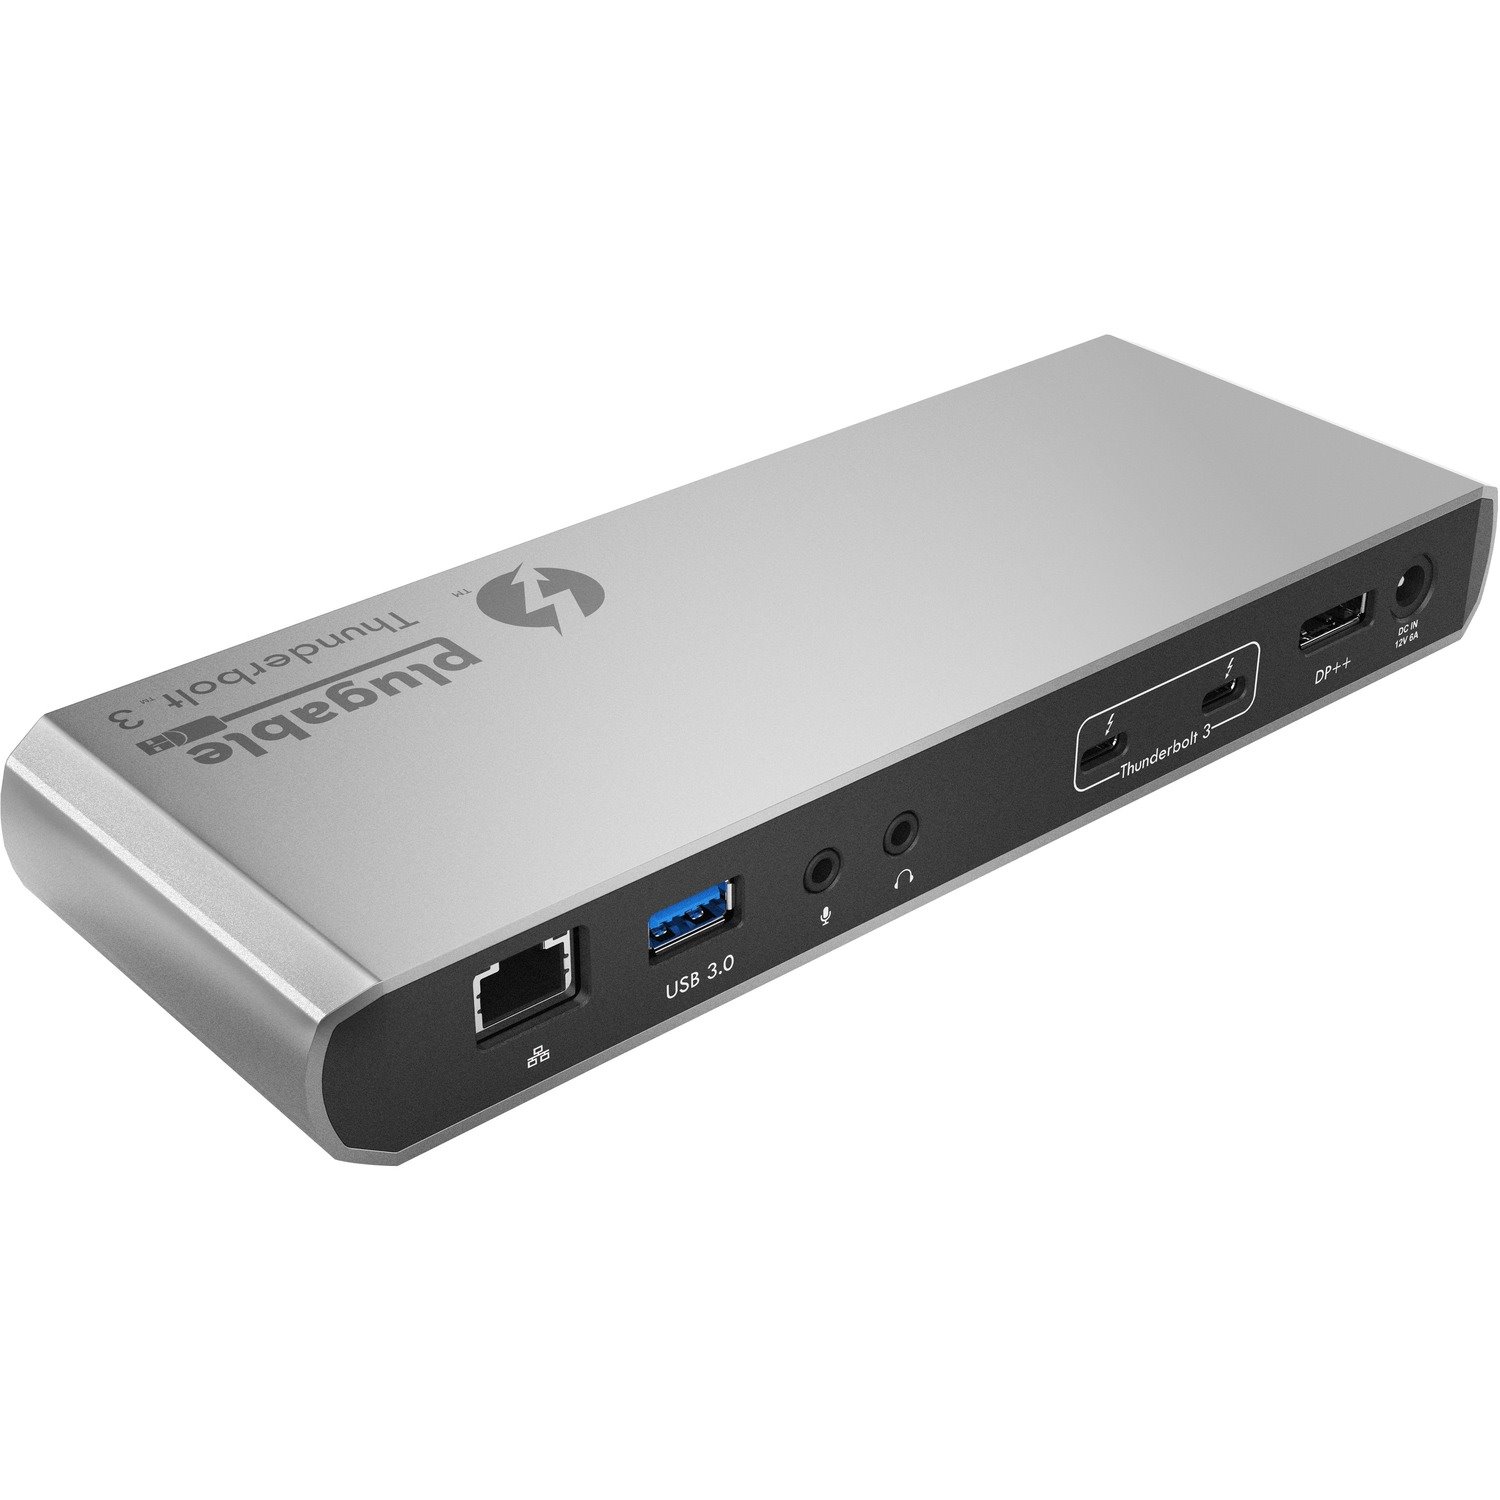 Plugable Thunderbolt 3 Dock, Enables Extra Displays, Wired Network, Audio, and More USB Ports